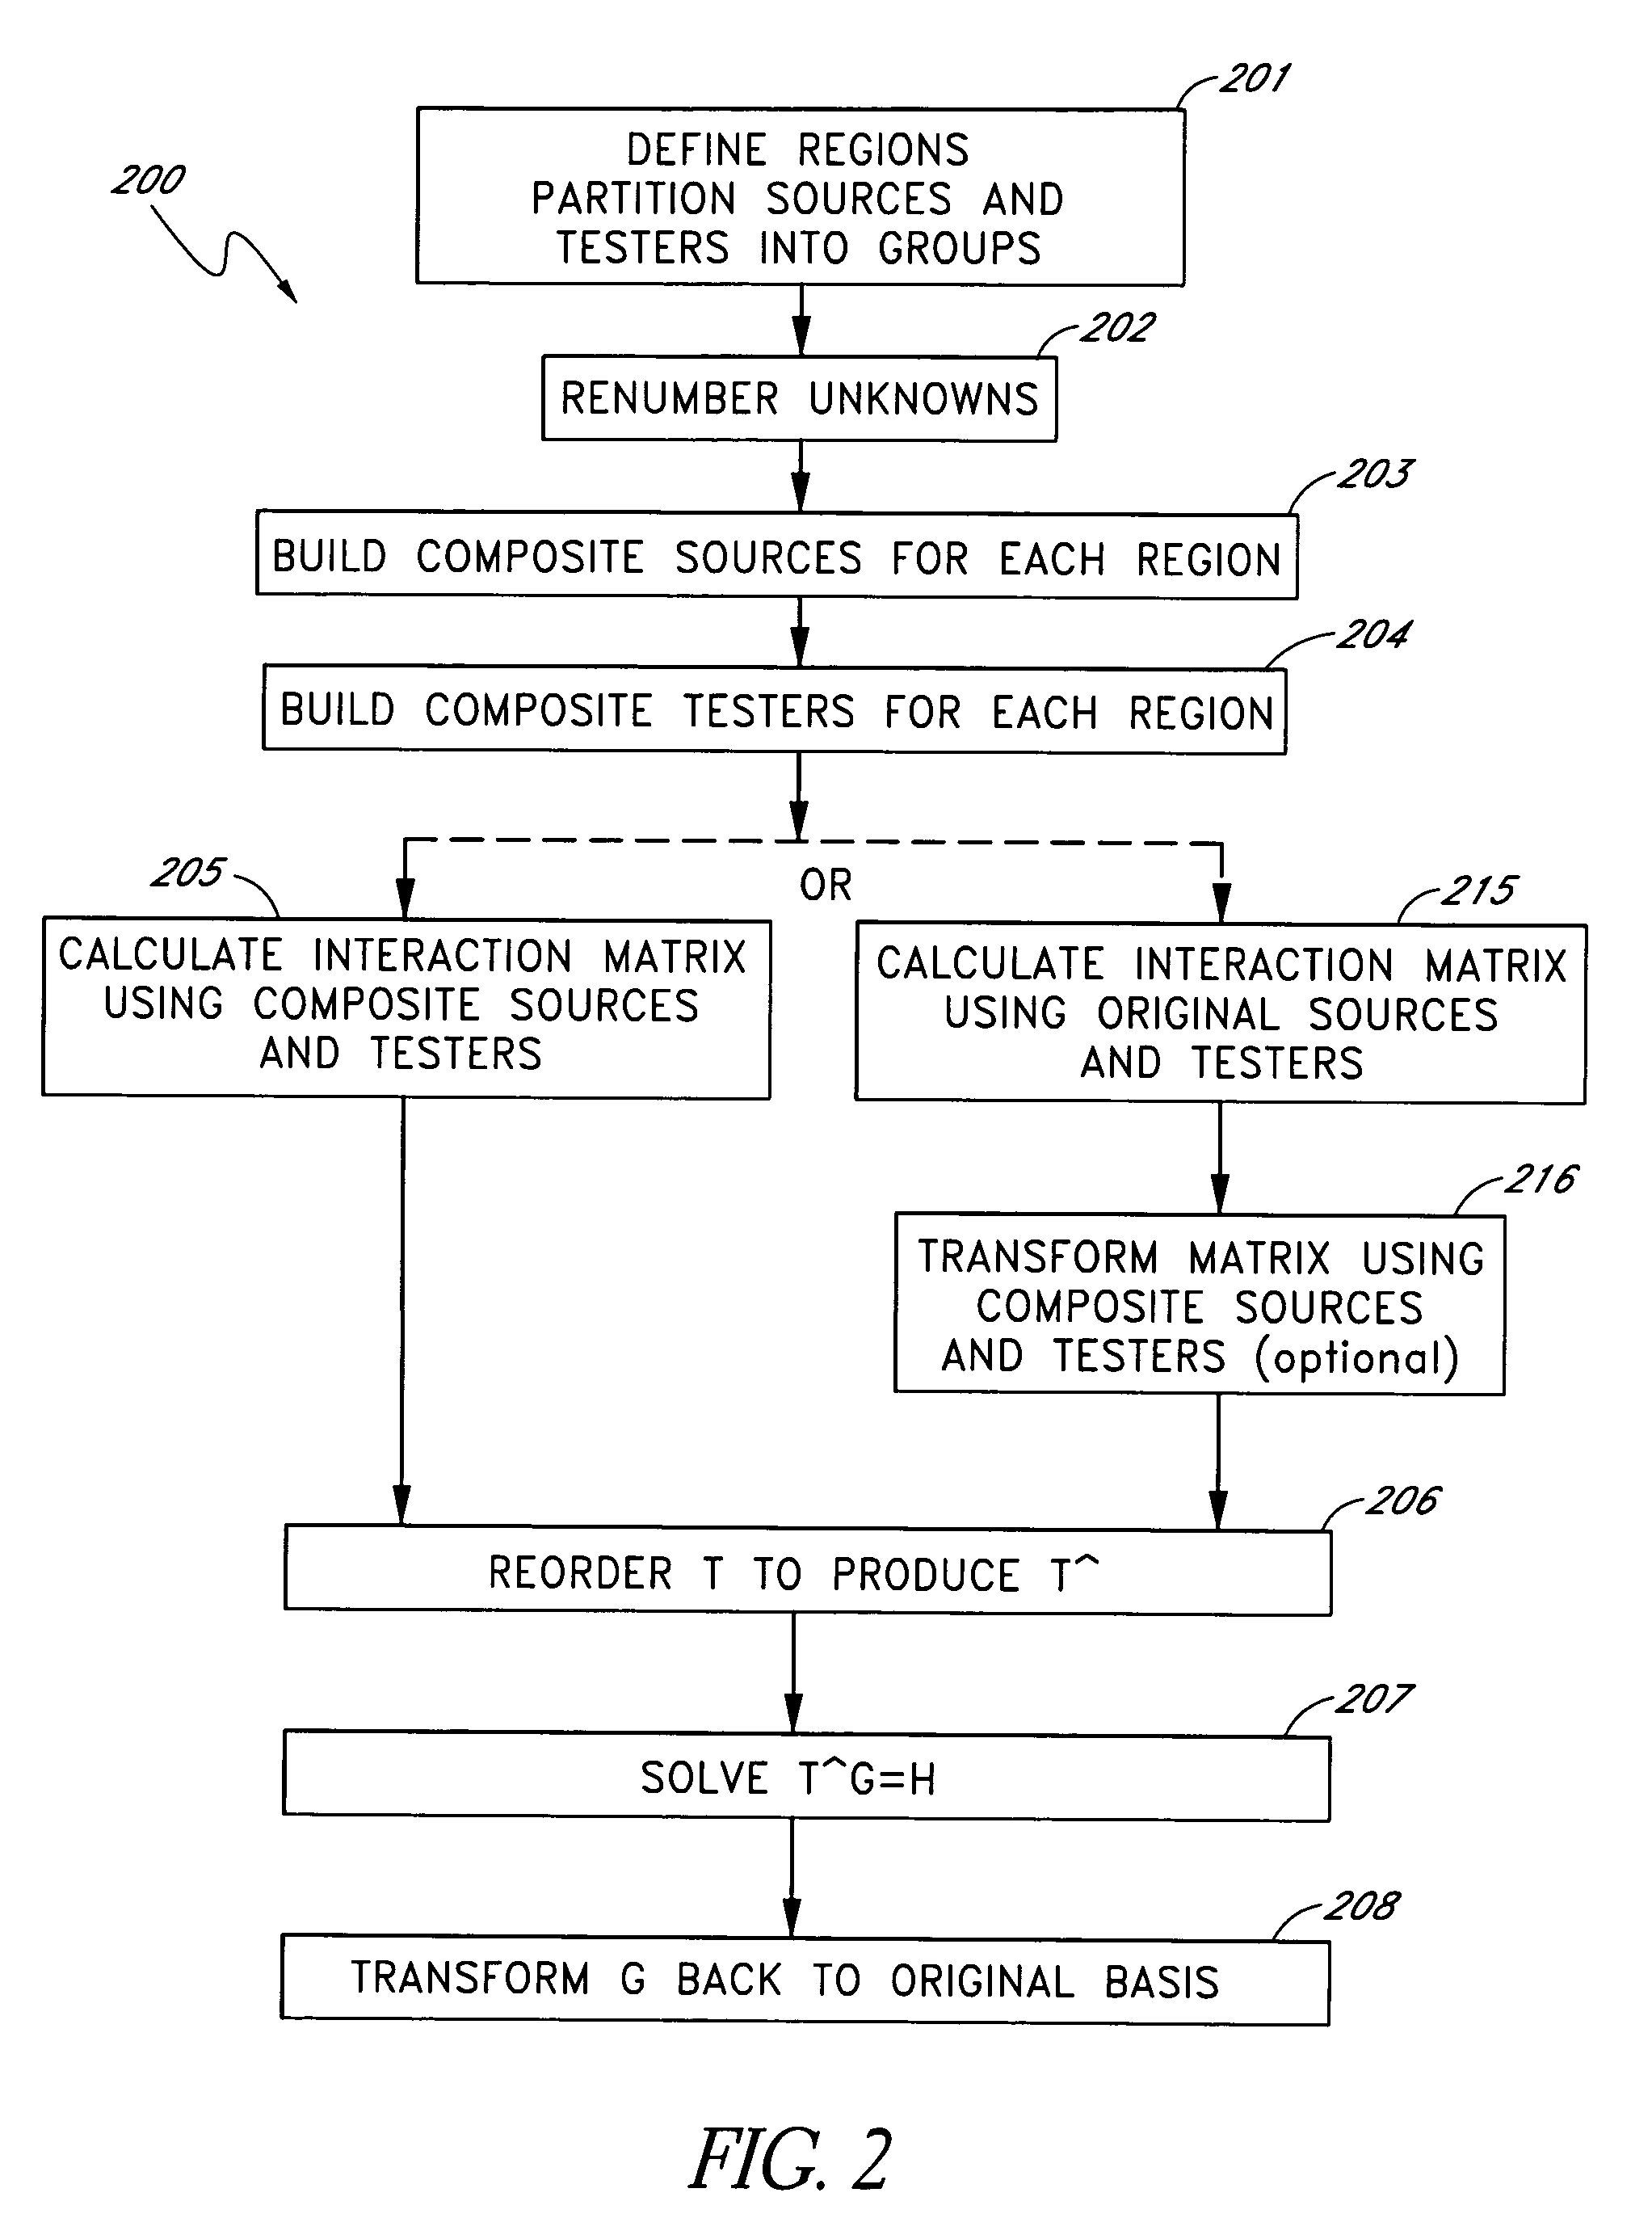 Compression of interaction data using directional sources and/or testers